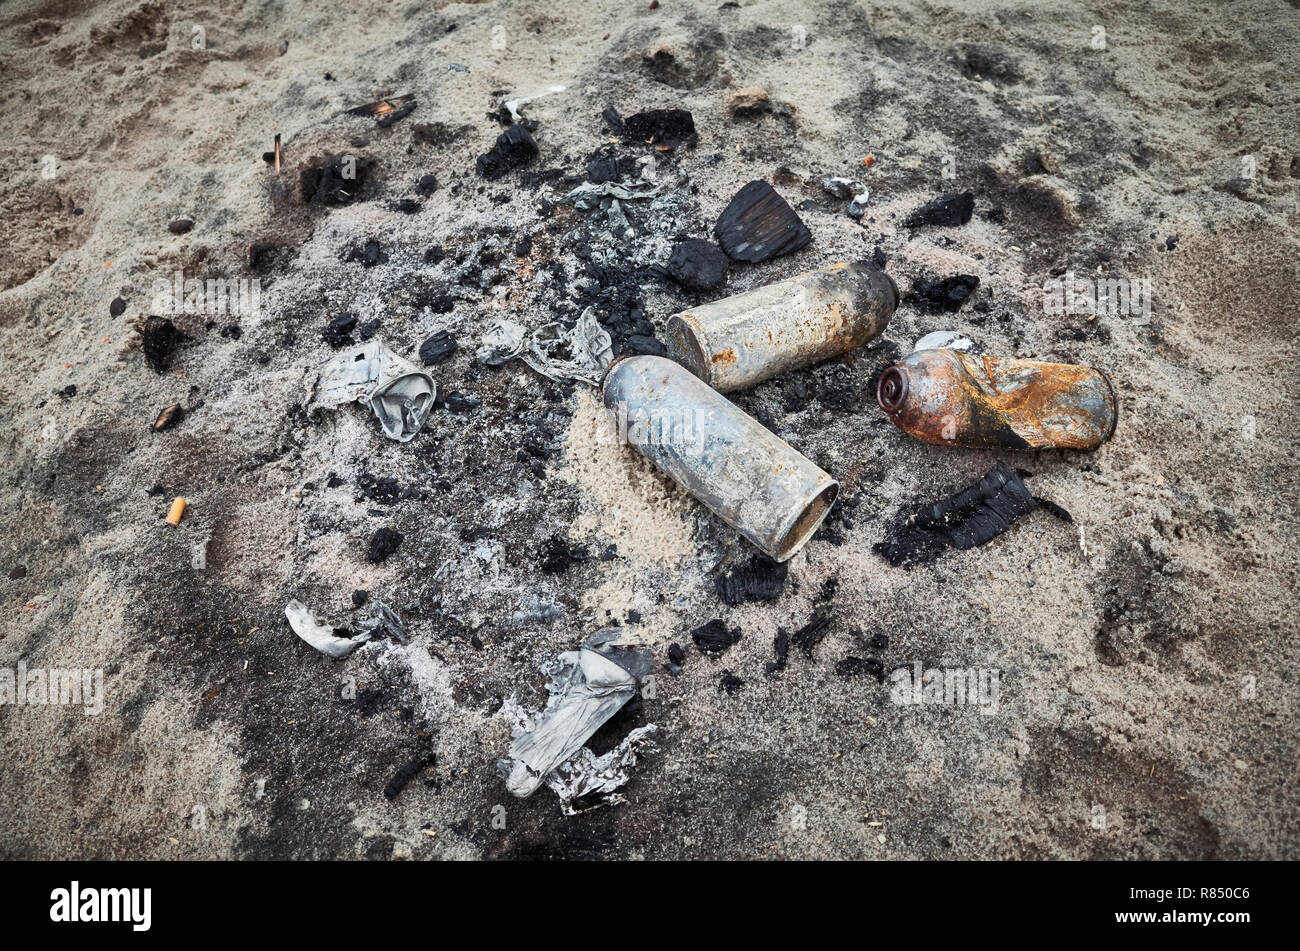 Burnt cans on sand, environmental pollution concept. Stock Photo